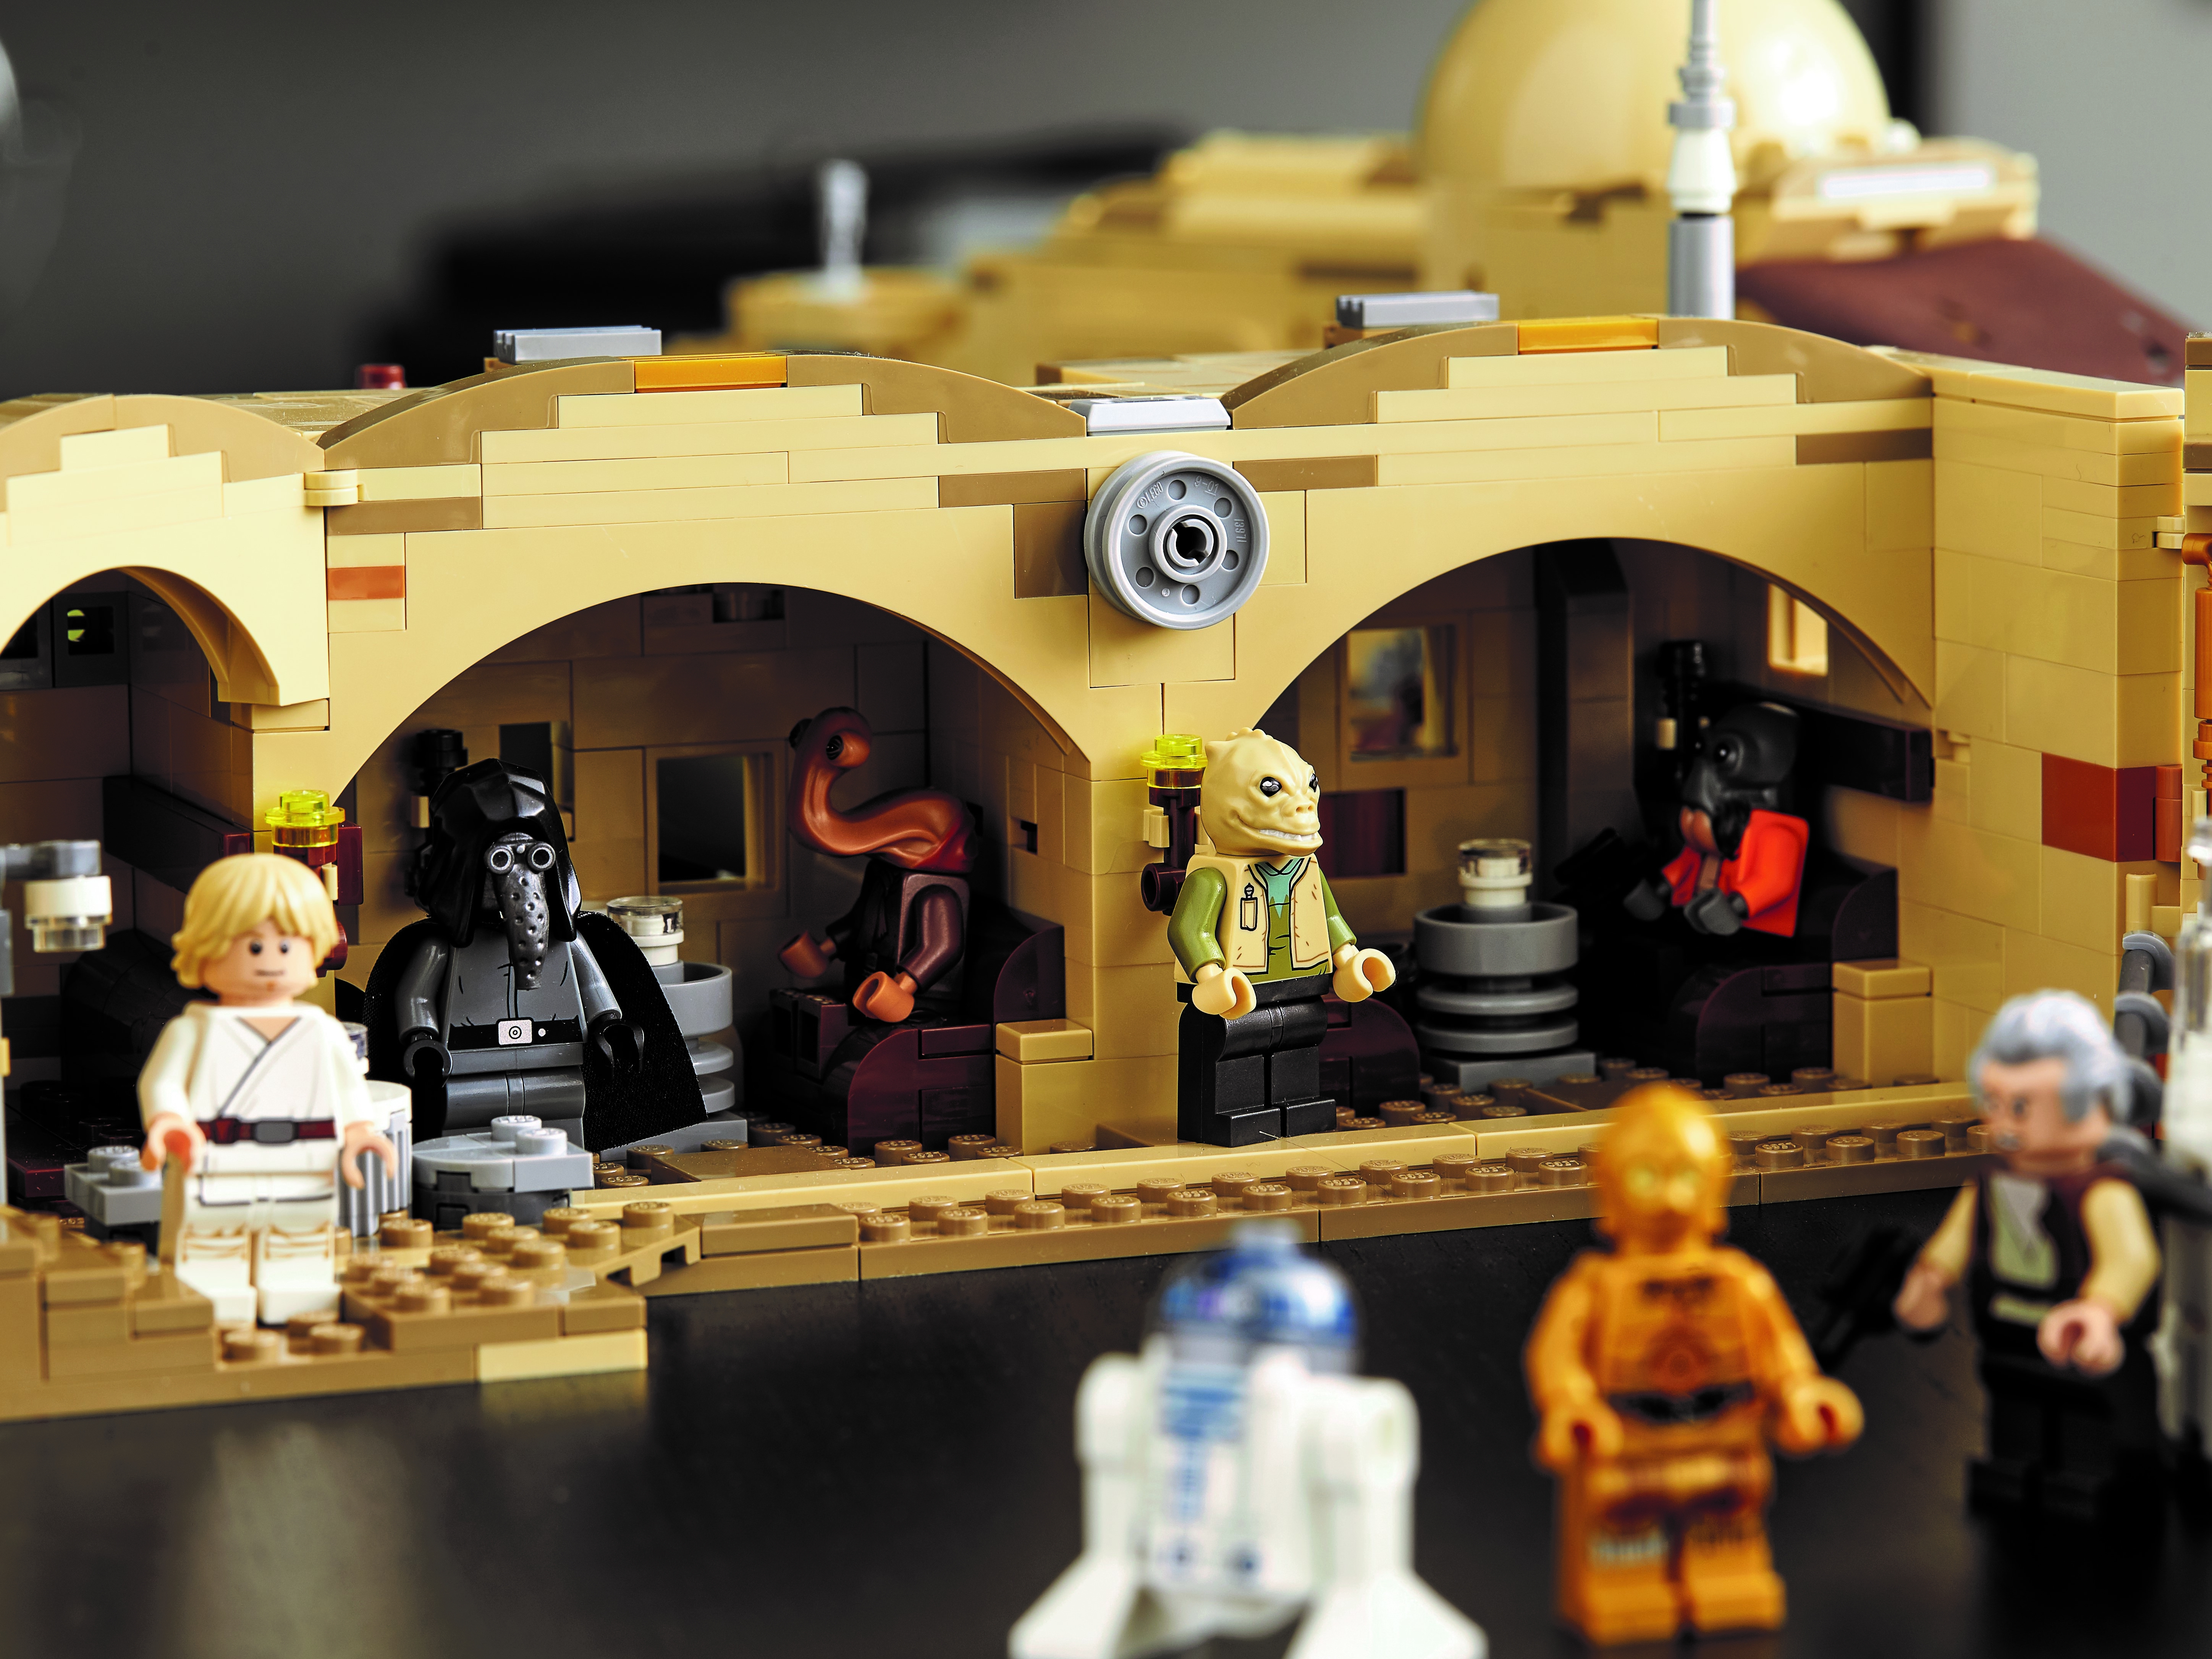 MOC Space Wars Star Movie SW Tatooine Mos Eisley Cantina Chapter